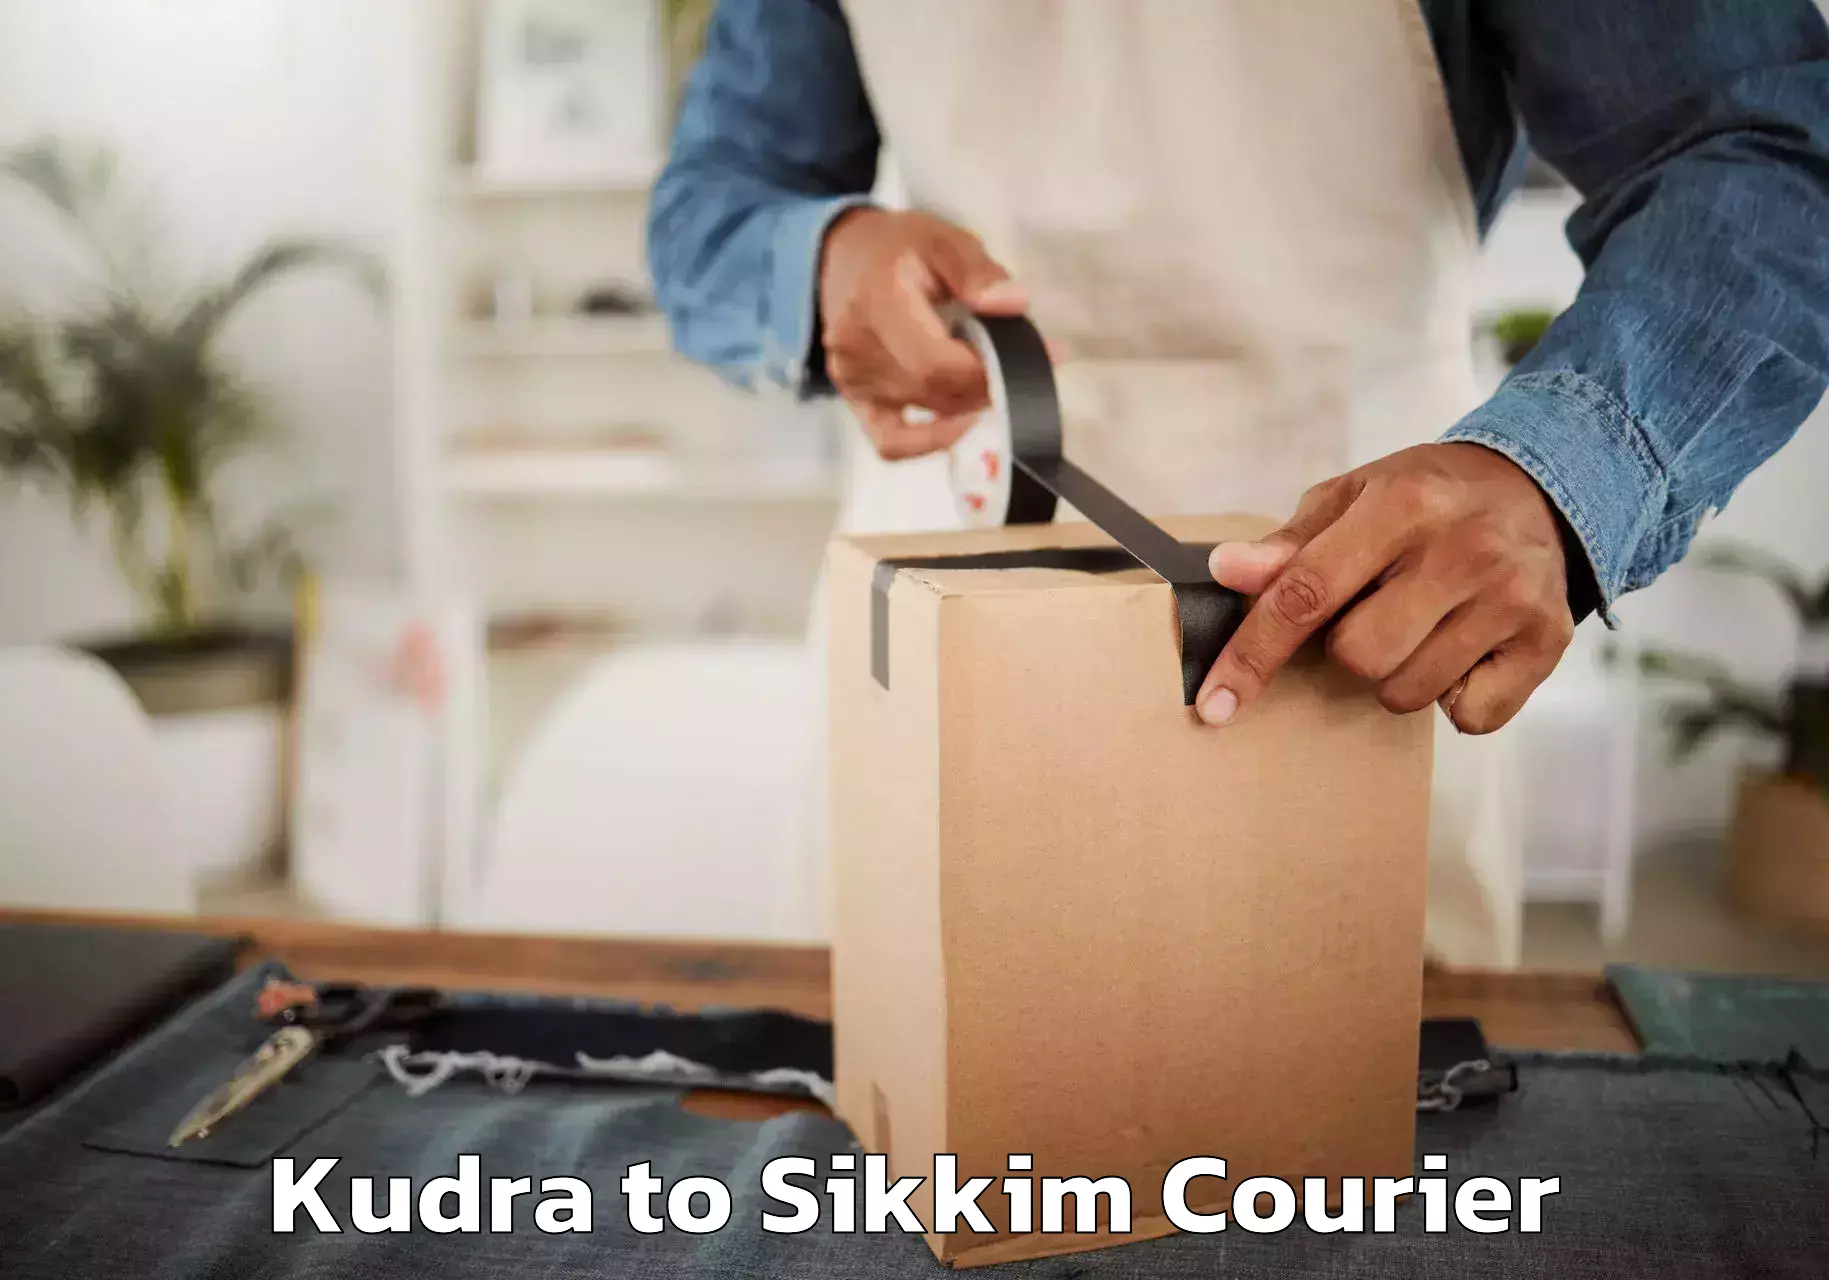 Furniture delivery service Kudra to East Sikkim